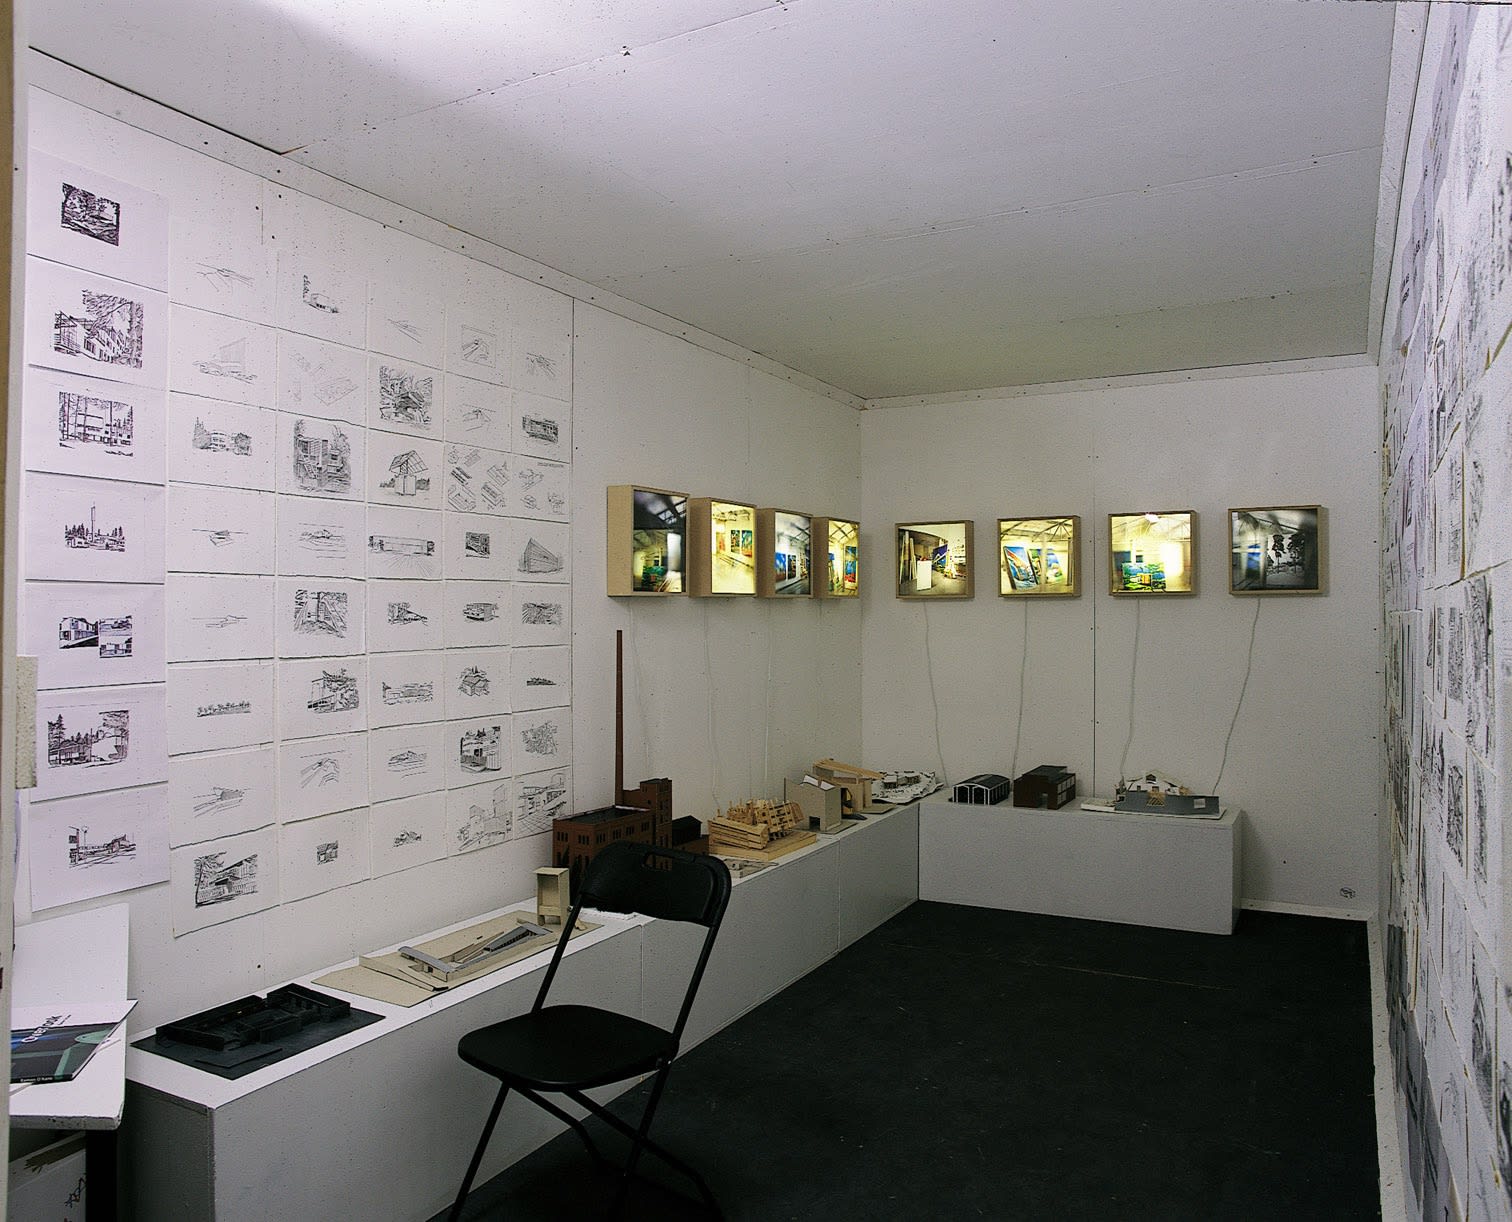 The Mobile Museum